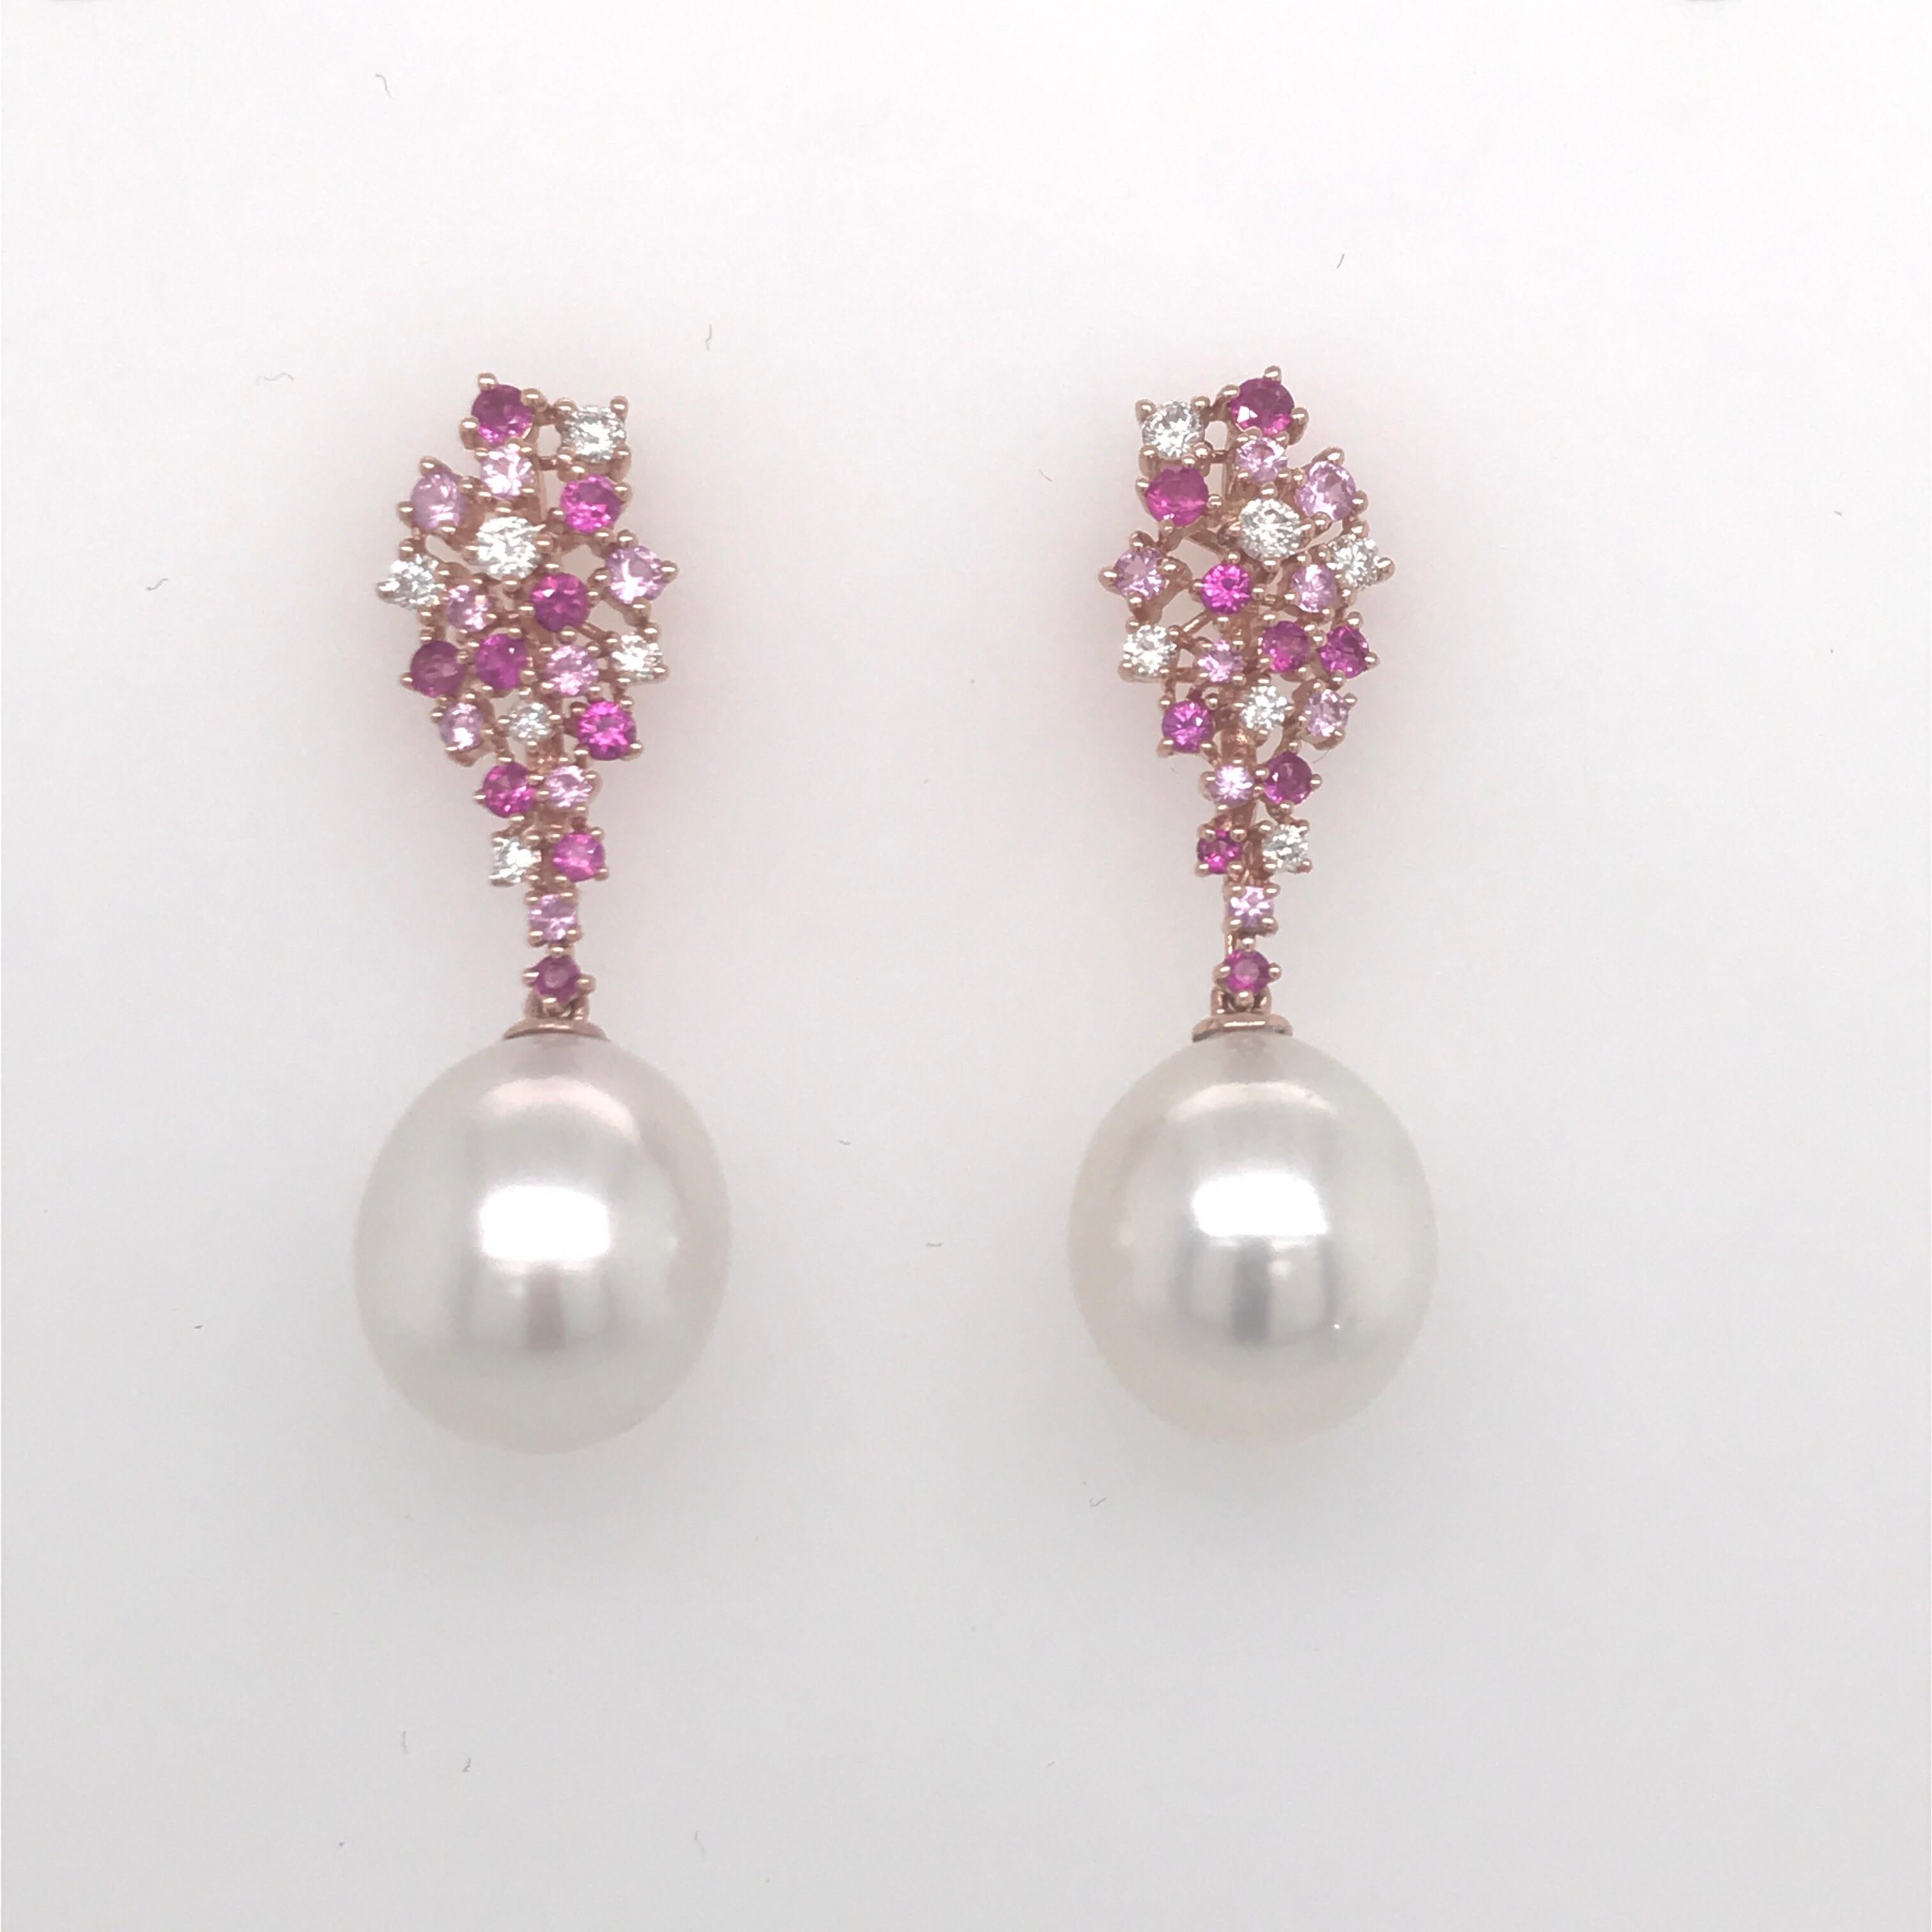 18K Rose Gold earrings featuring two pink Freshwater pearls measuring 12-13 mm flanked with 34 pink sapphires, 1.07 carats, and 12 round brilliants, 0.34 carats. 